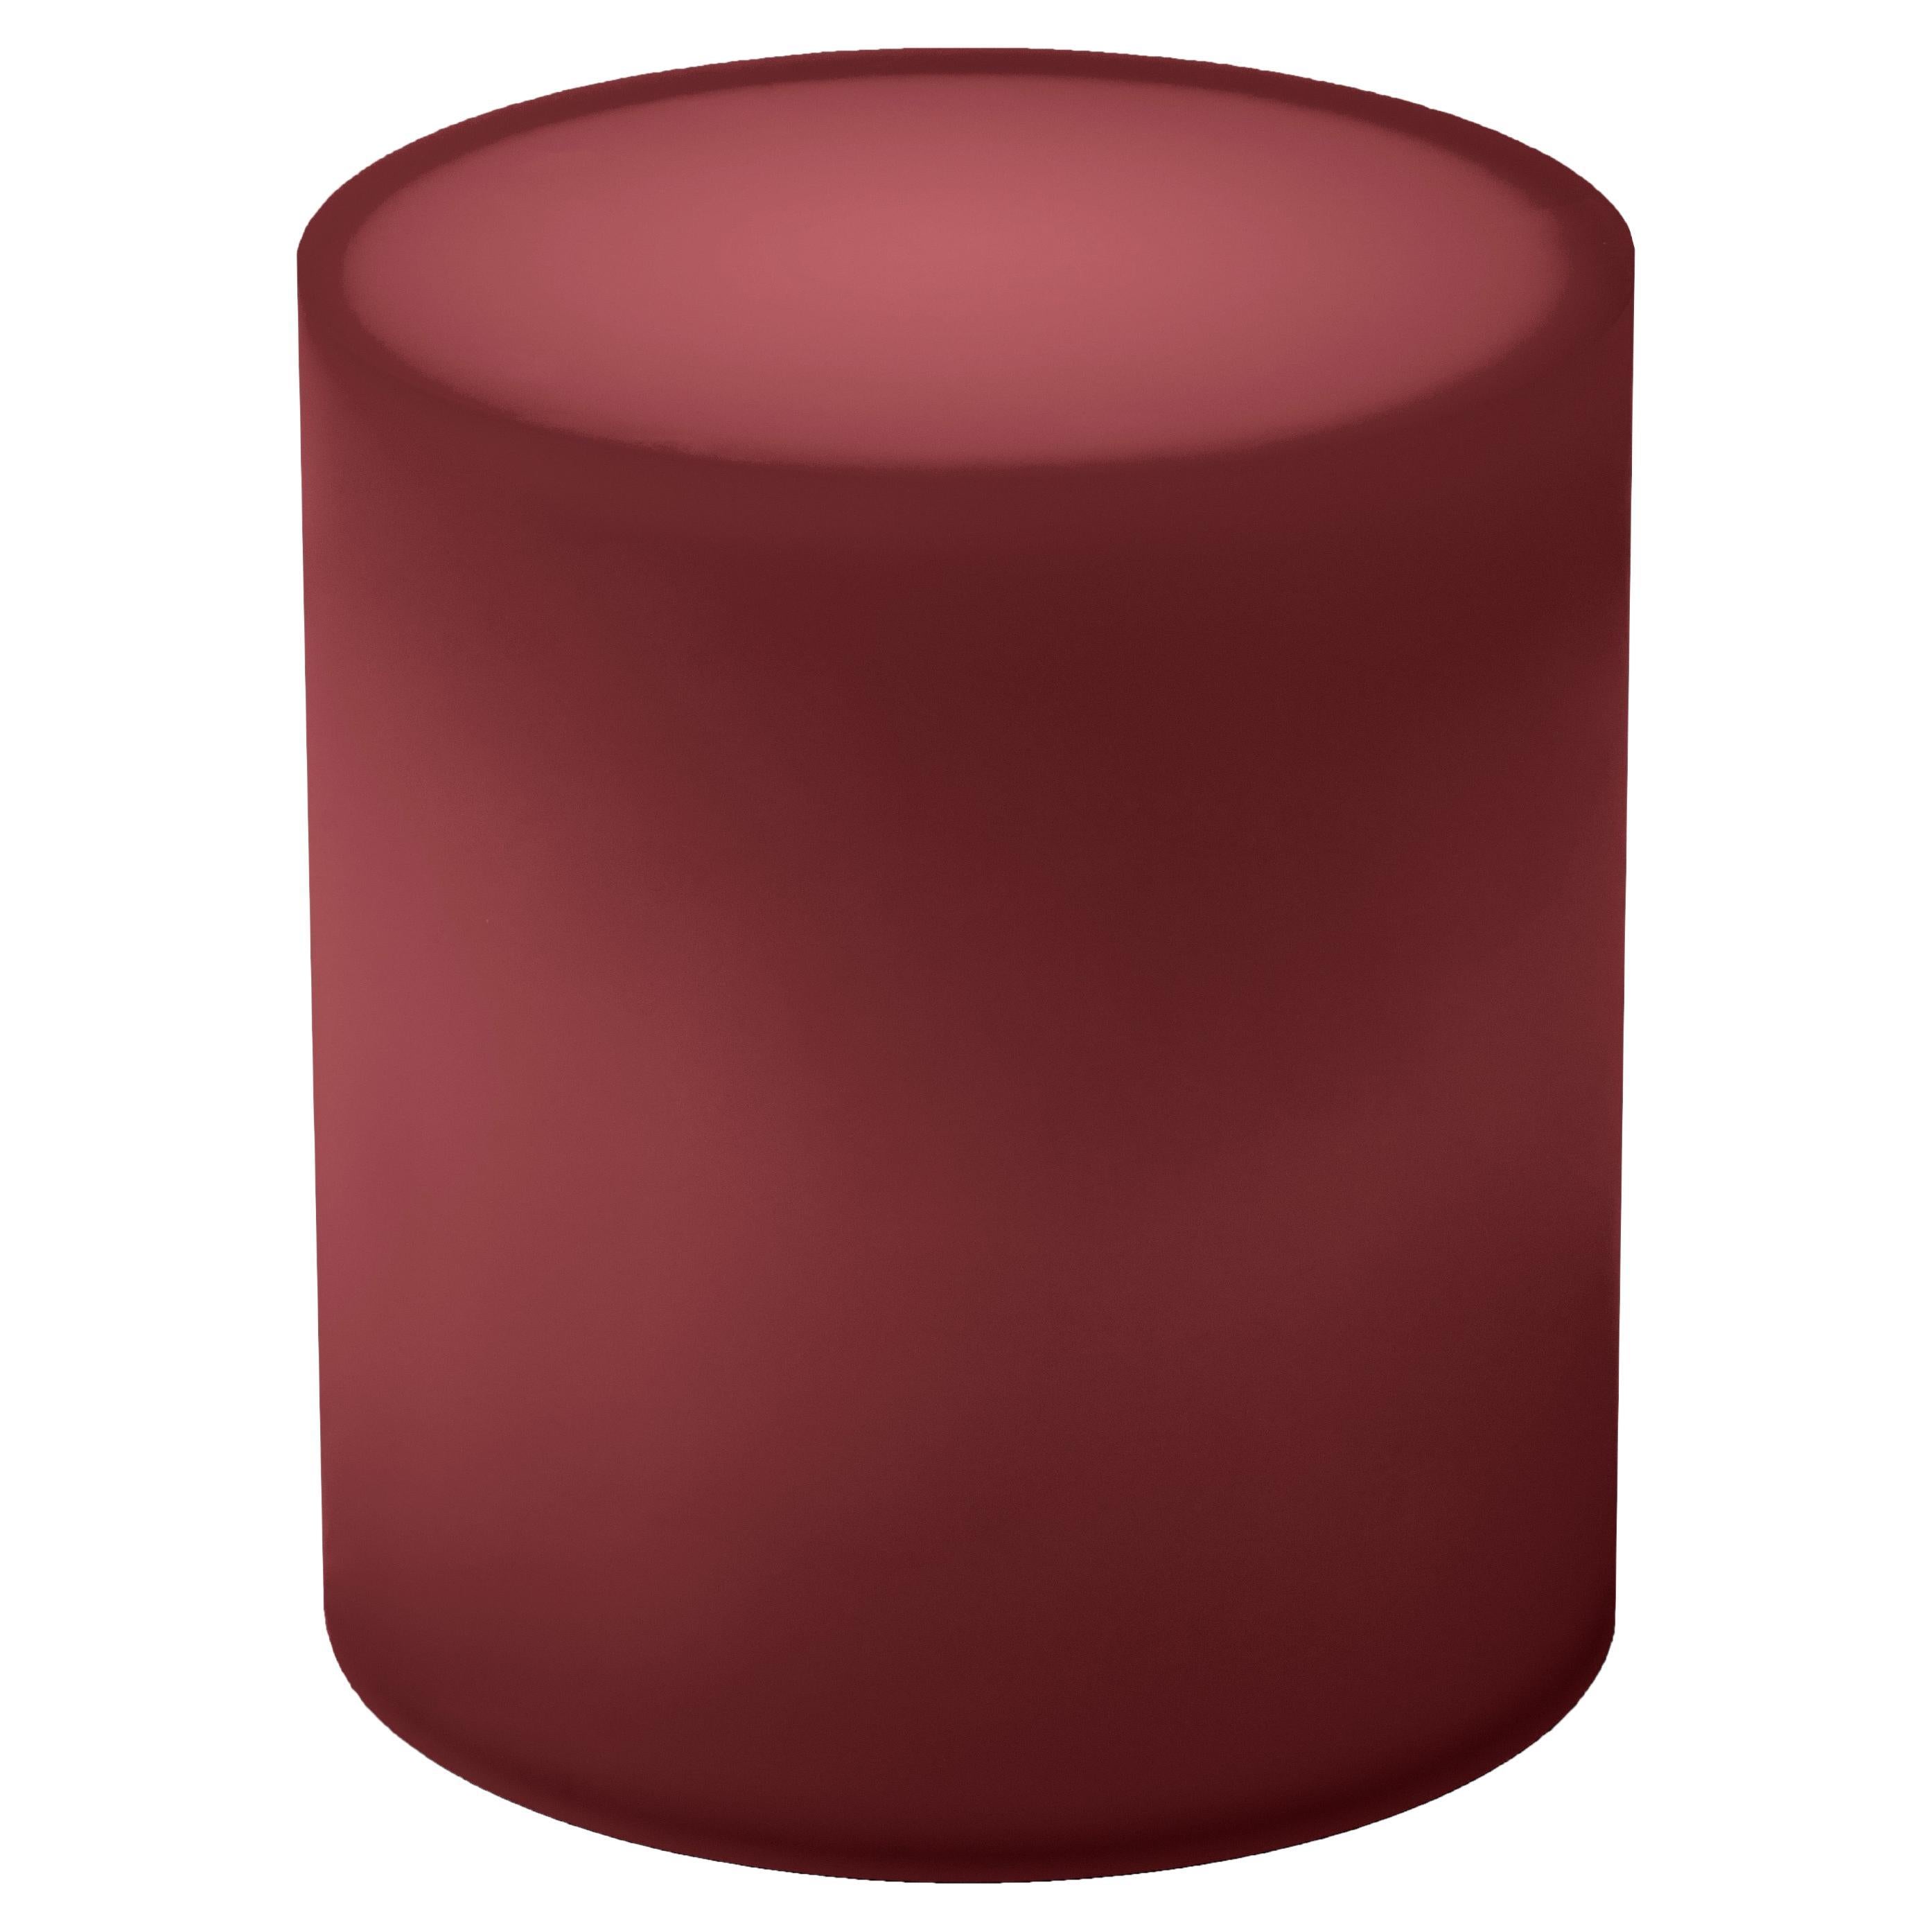 Drum Resin Side Table/Stool In Burgundy by Facture, REP by Tuleste Factory For Sale